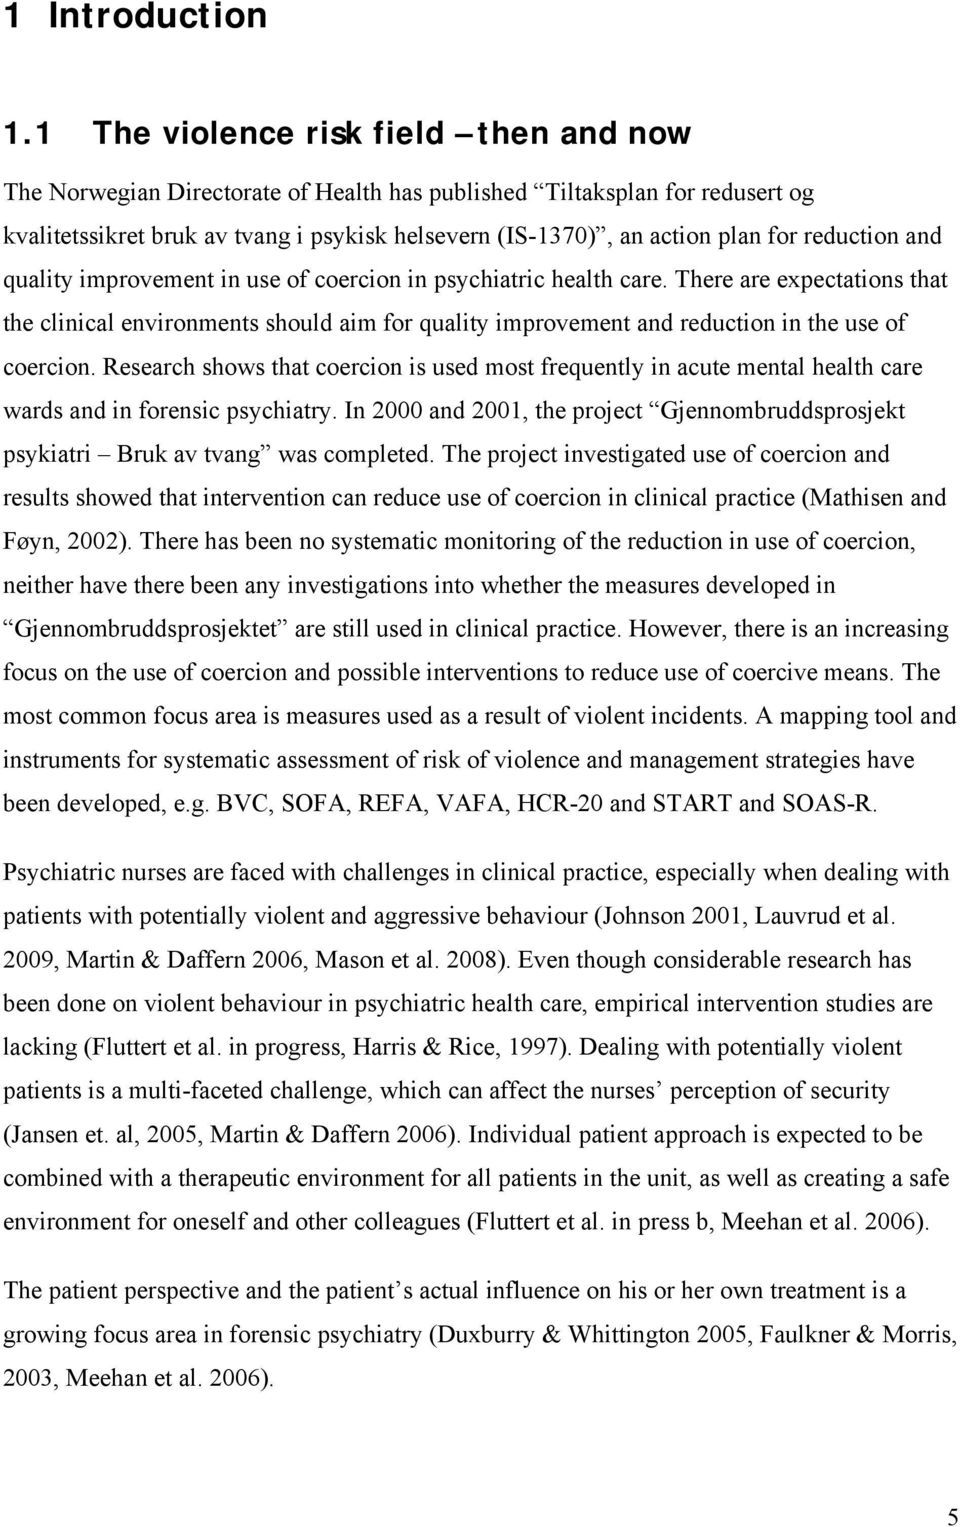 reduction and quality improvement in use of coercion in psychiatric health care.